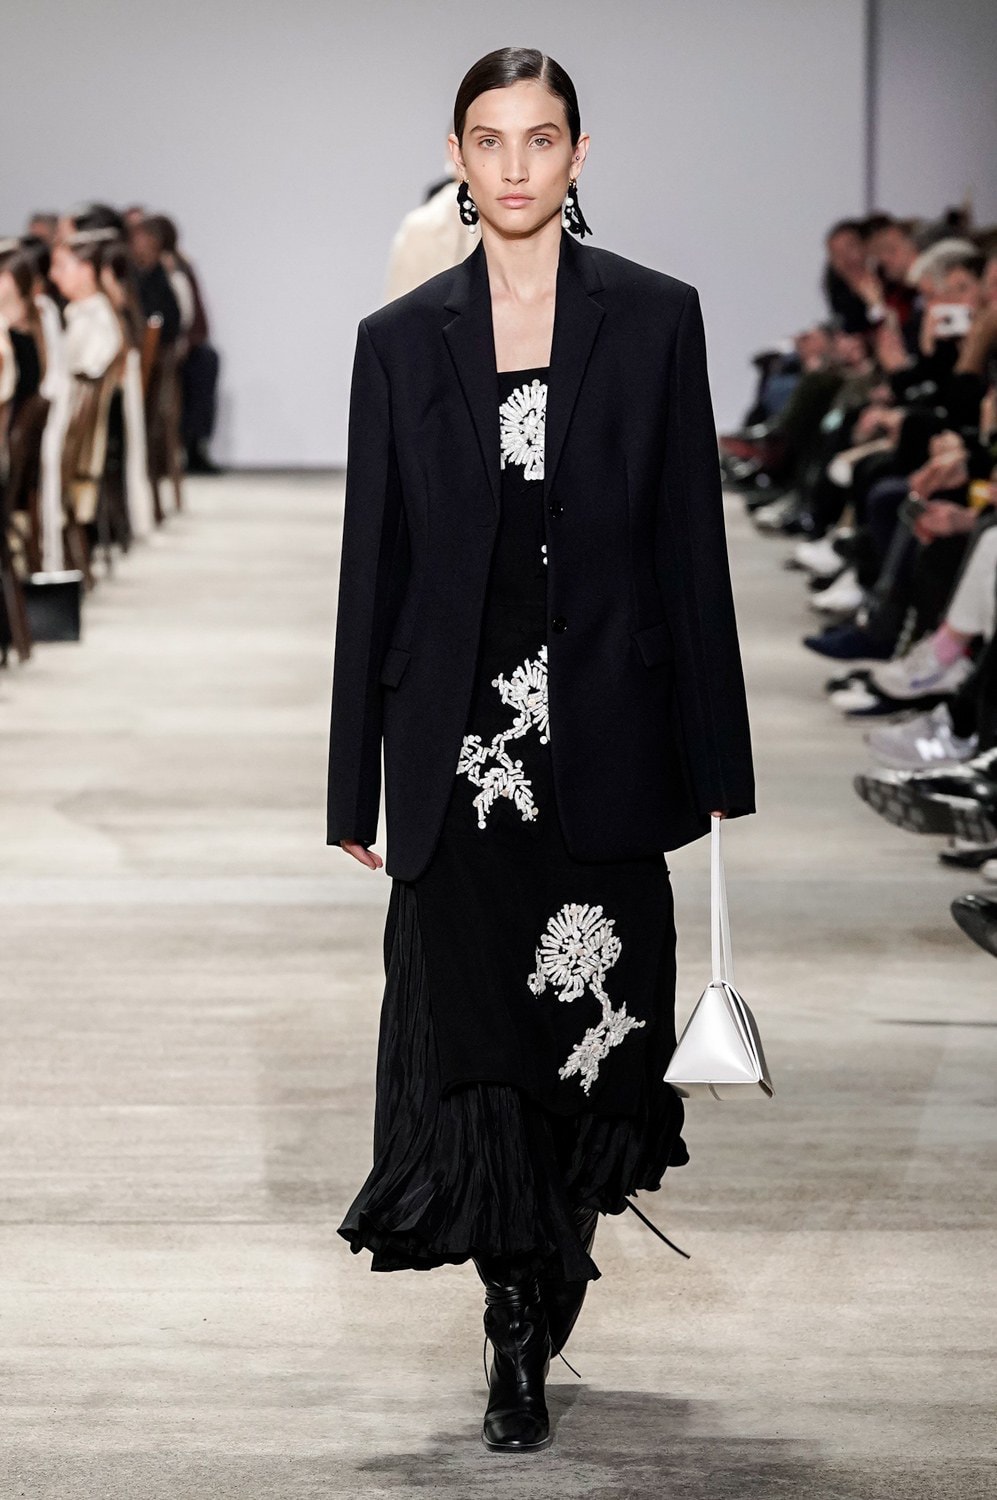 Jil Sander Fall/Winter 2020 Collection Runway Show Dress Floral Black White